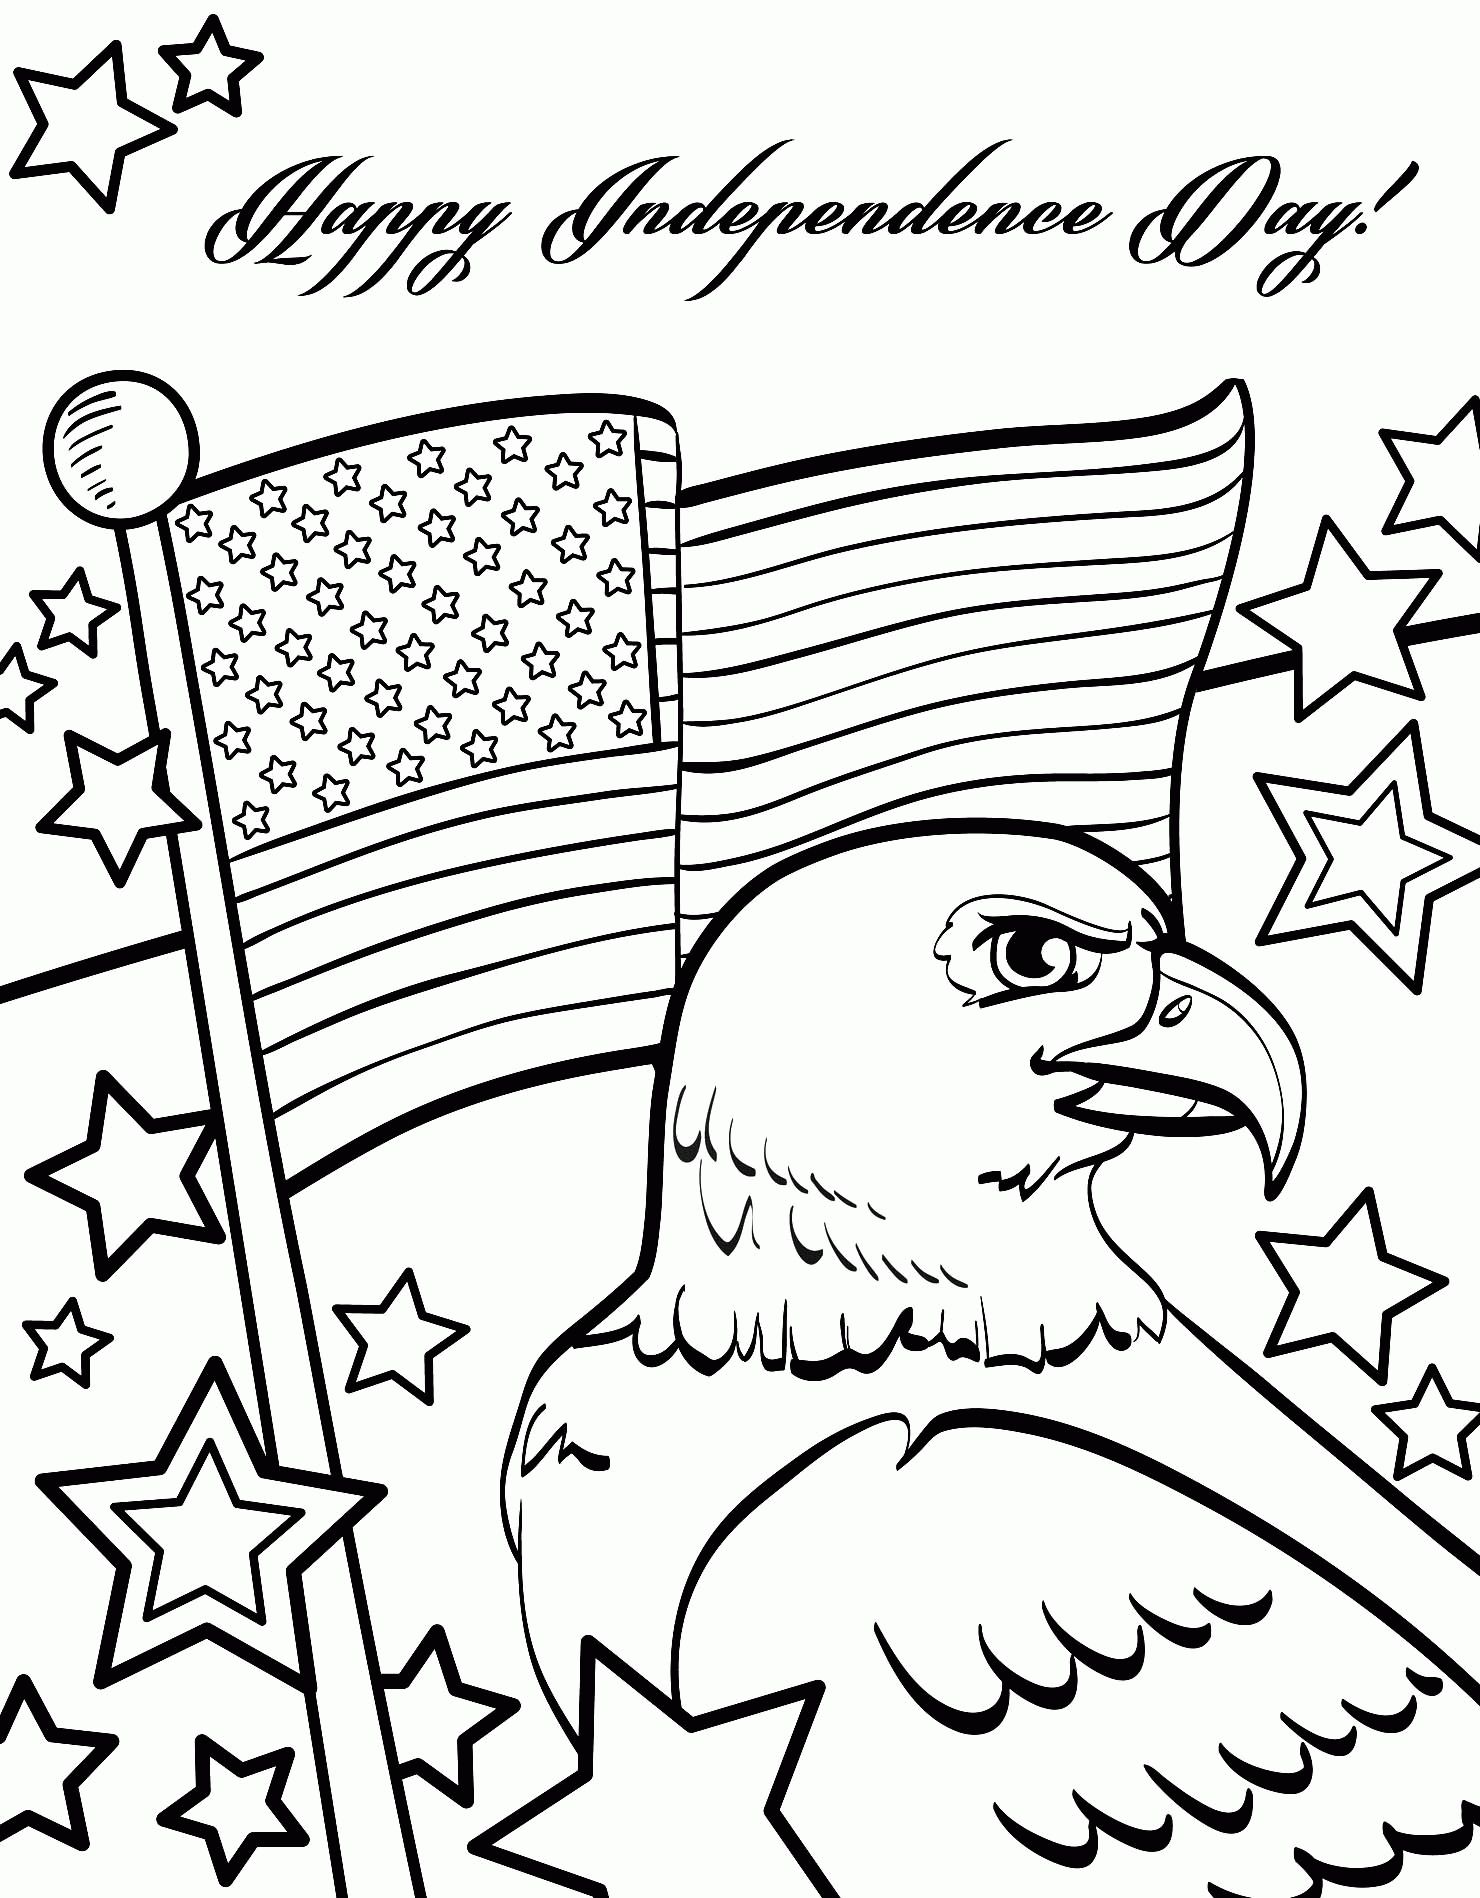 18 Printable Independence Day Coloring Pages - Holiday Vault